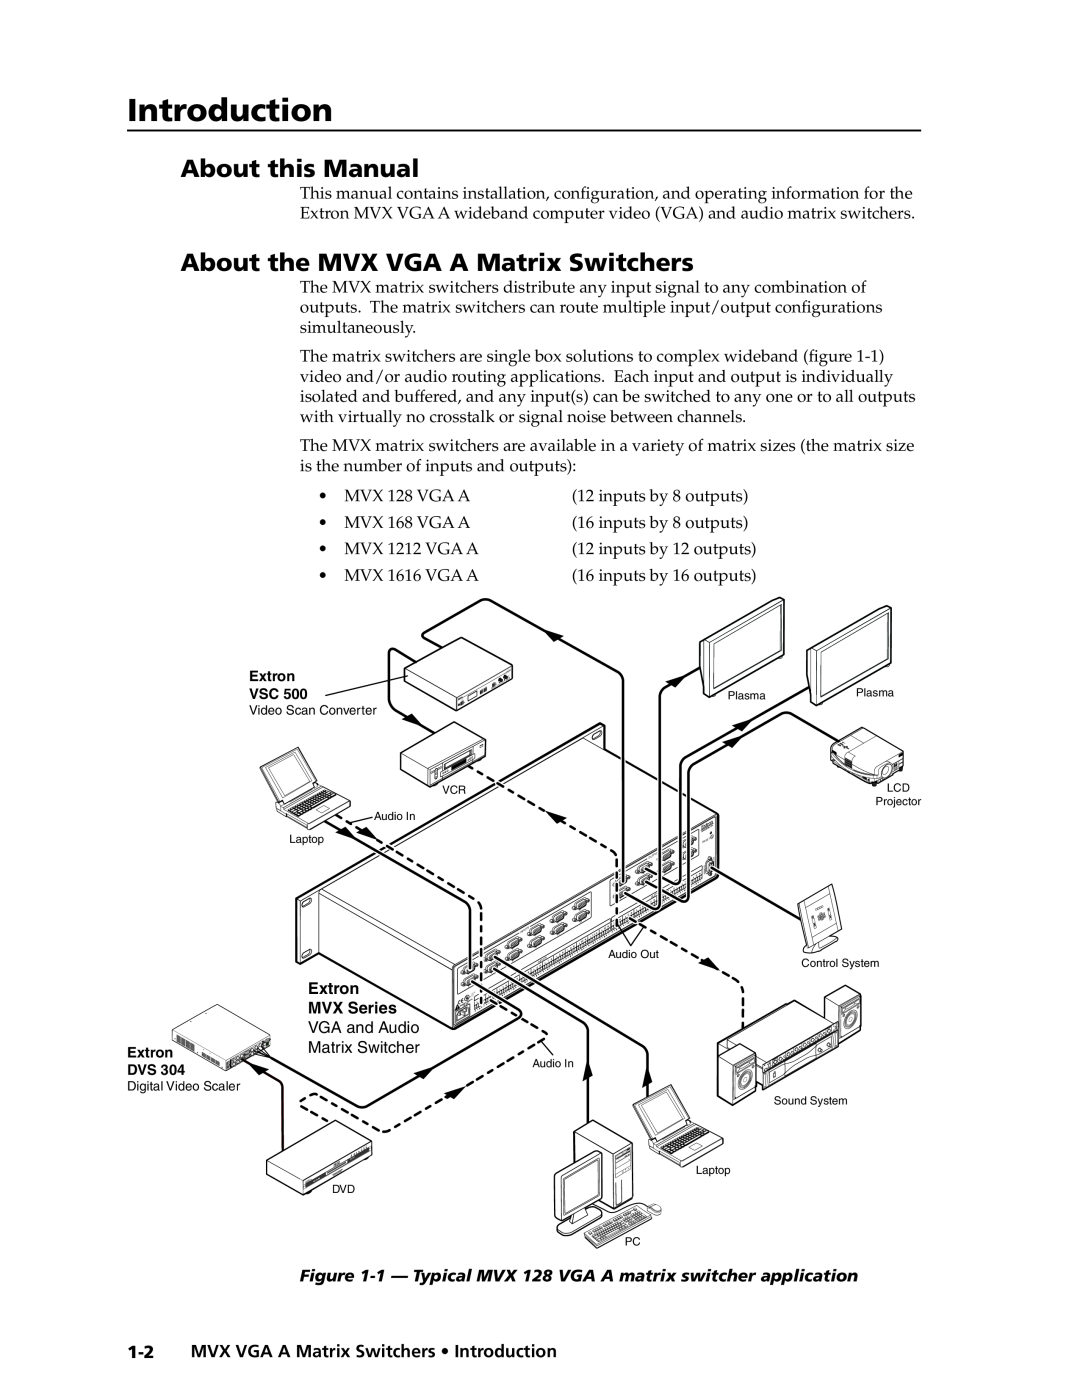 Extron electronic manual Introduction, About this Manual, About the MVX VGA A Matrix Switchers, Preliminary 